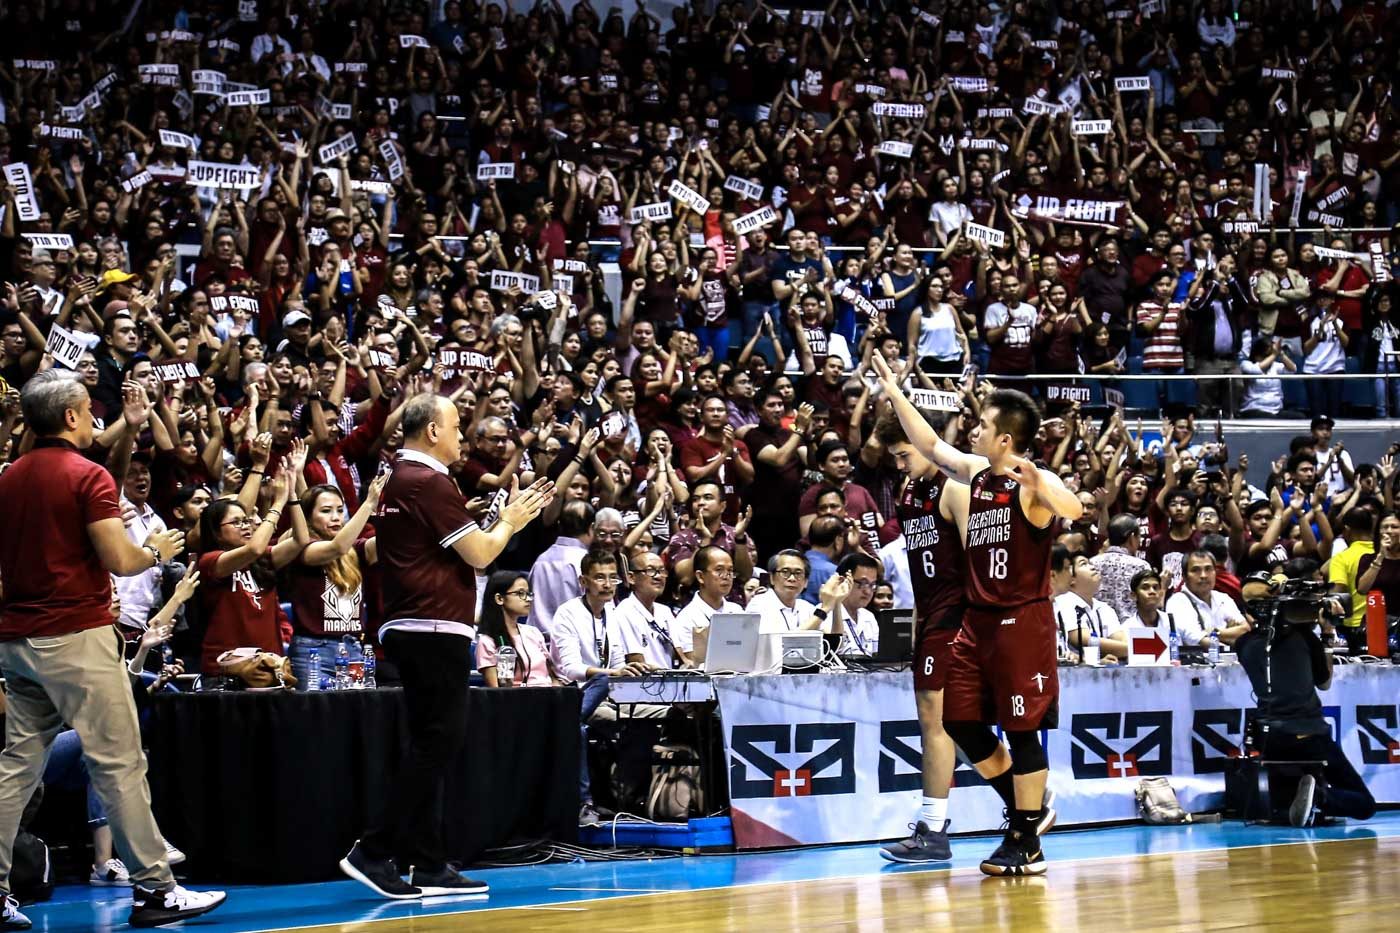 The fight is not done for the UP Maroons